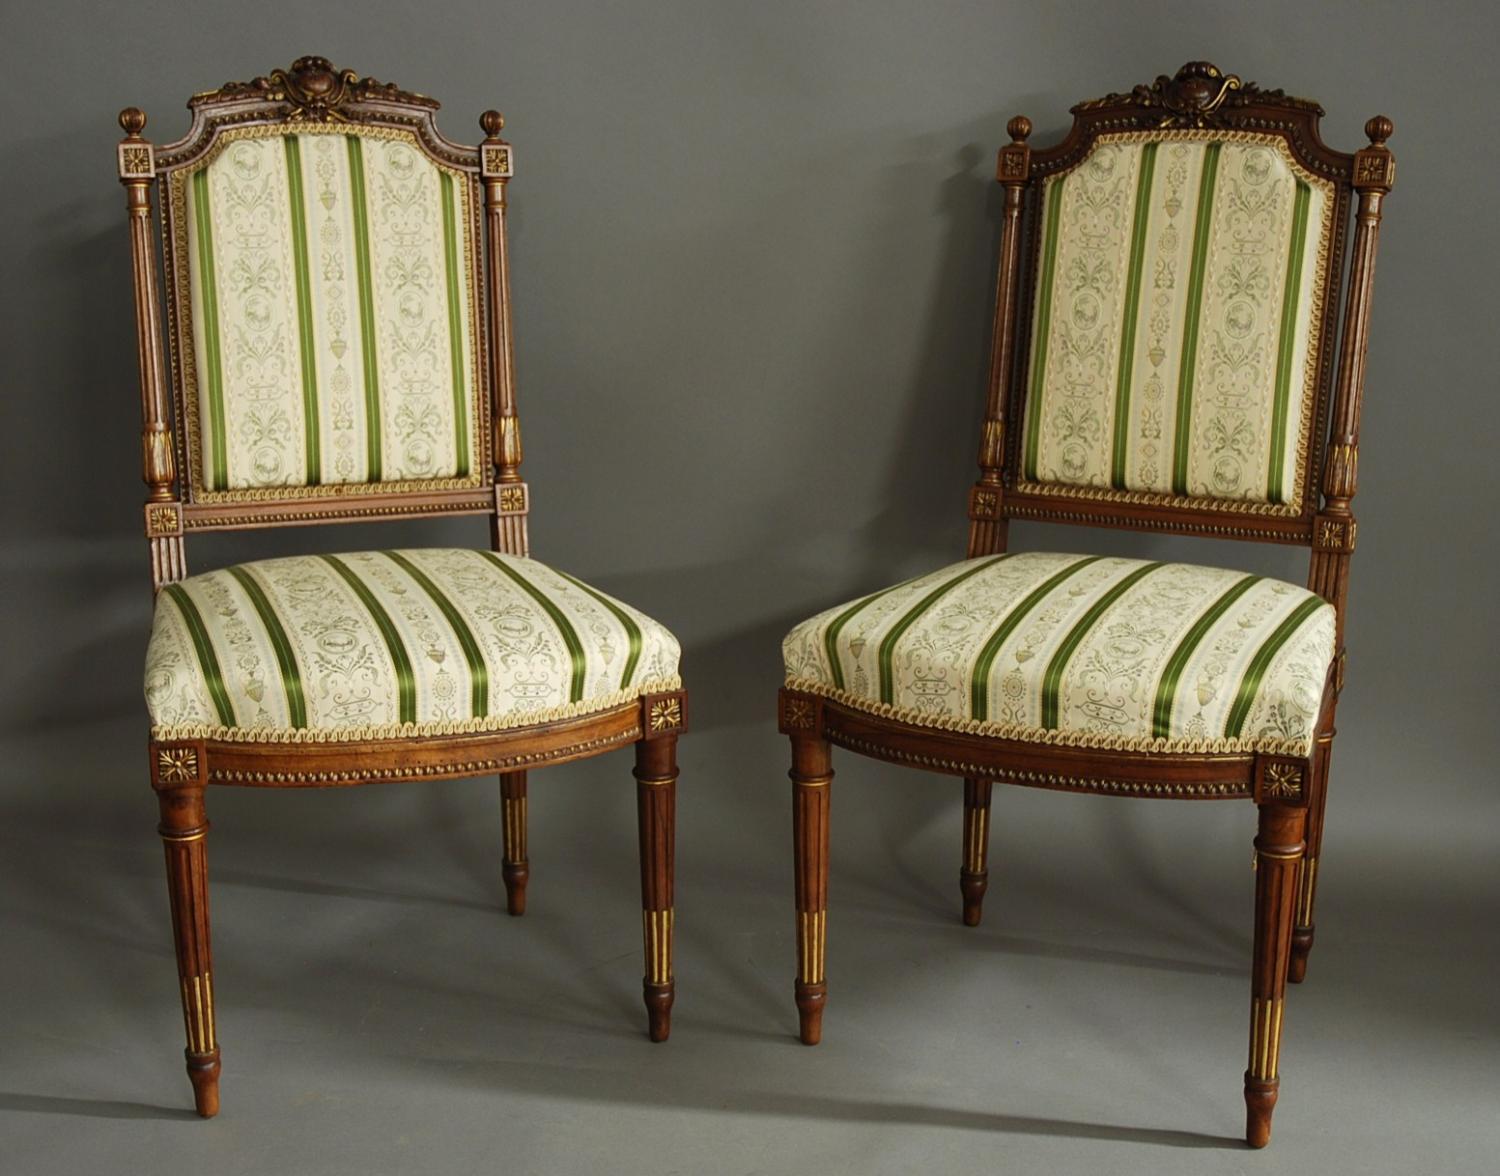 Pair of French carved walnut chairs